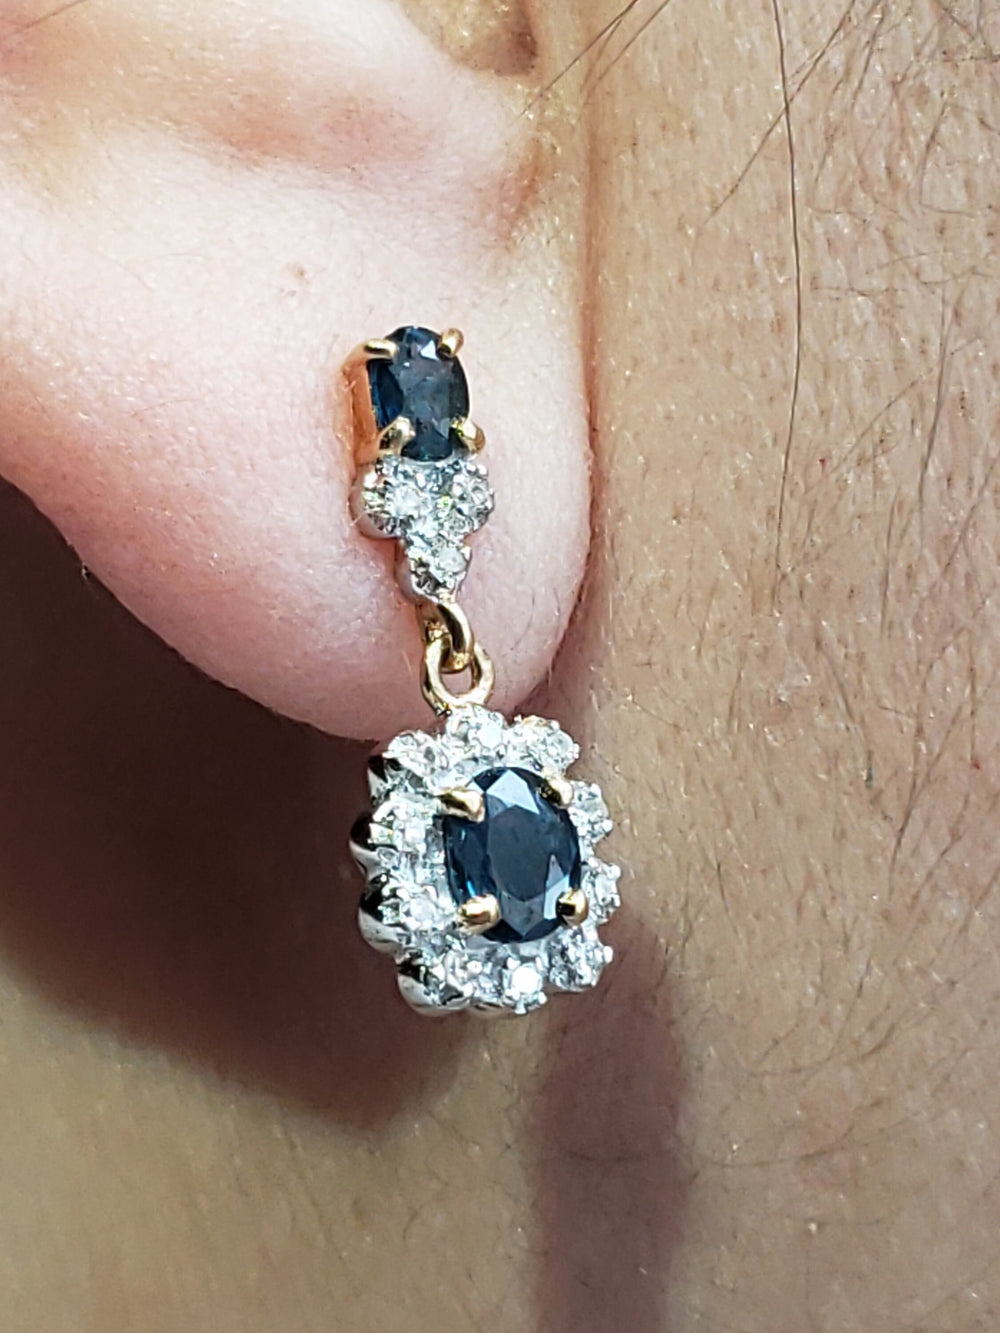 Sapphire and Diamond Earrings / Sapphire and Diamond Cluster Earrings / Princess Diana - Kate Middleton Cluster Earrings